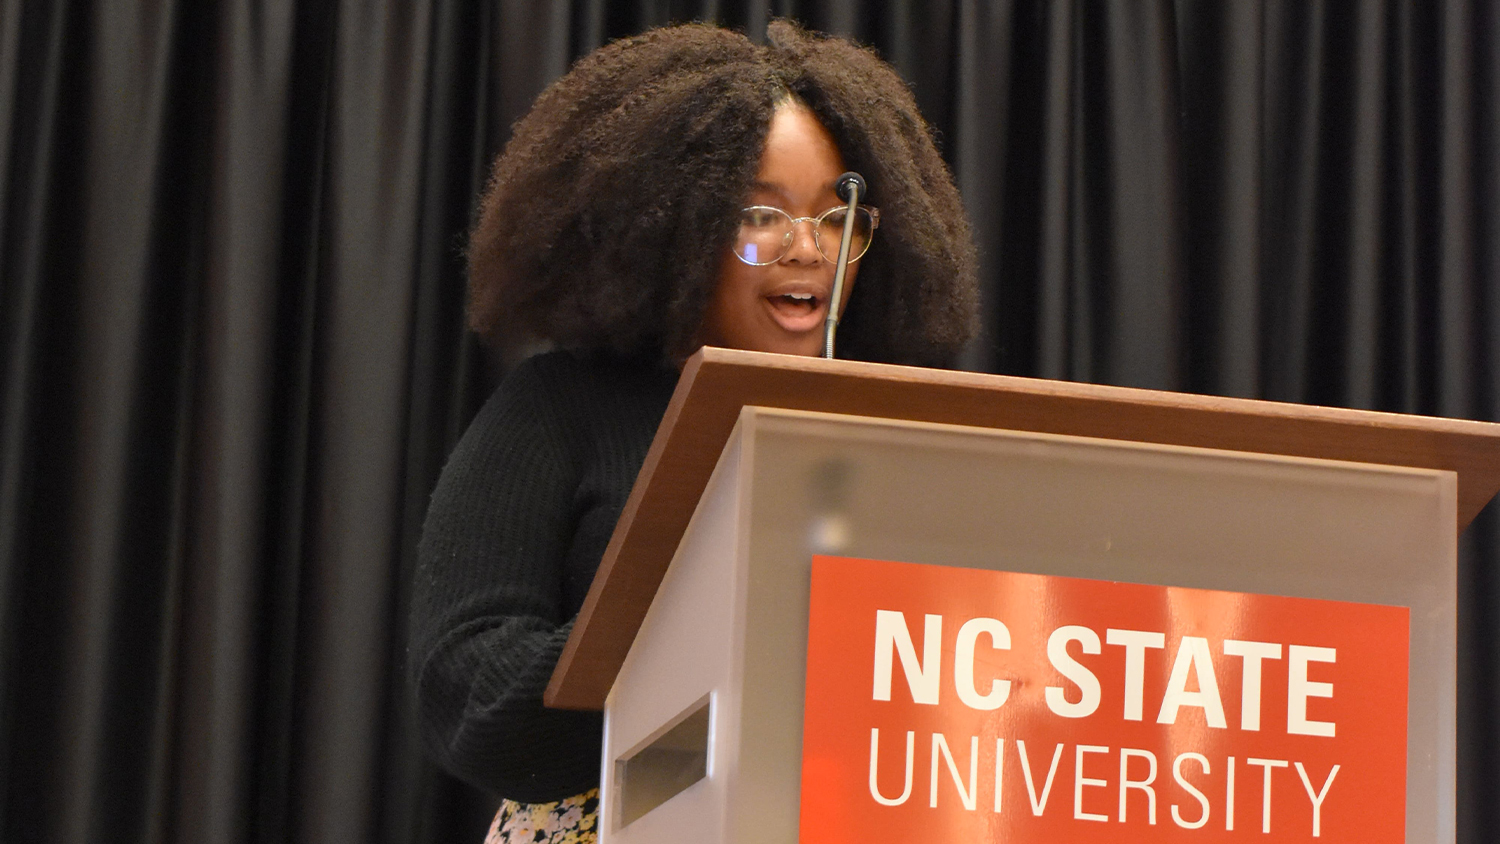 Naudia McKoy speaking at a podium with the NC State logo on it